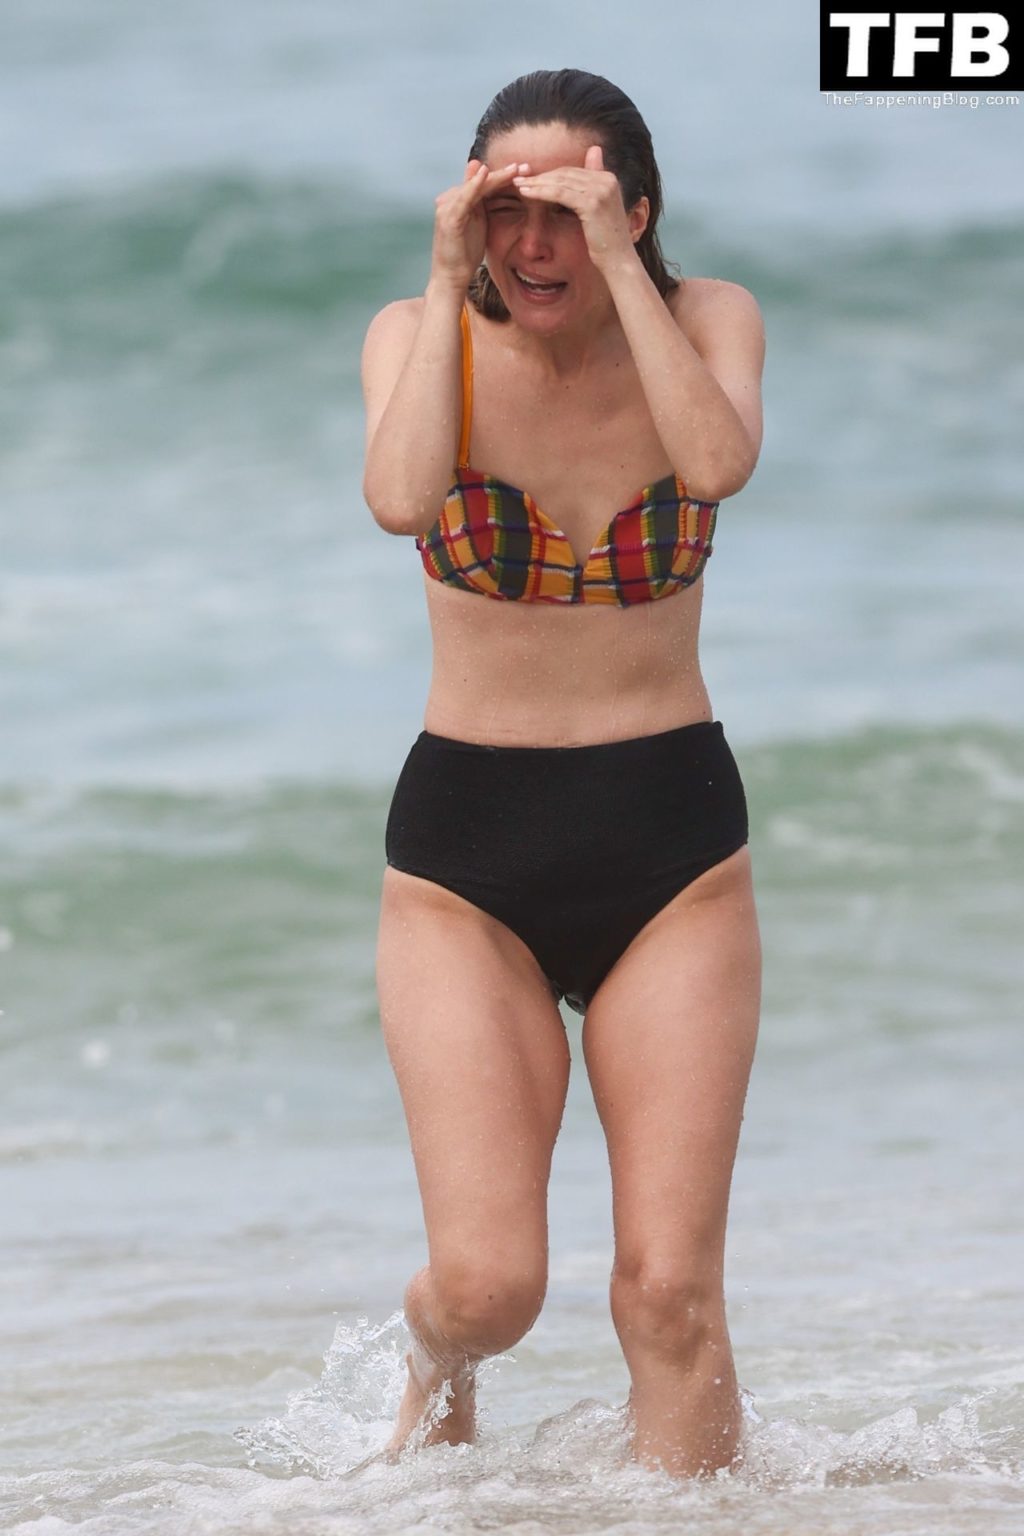 Rose Byrne Sexy The Fappening Blog 65 1024x1536 - Rose Byrne & Kick Gurry Enjoy a Day on the Beach in Sydney (90 Photos)